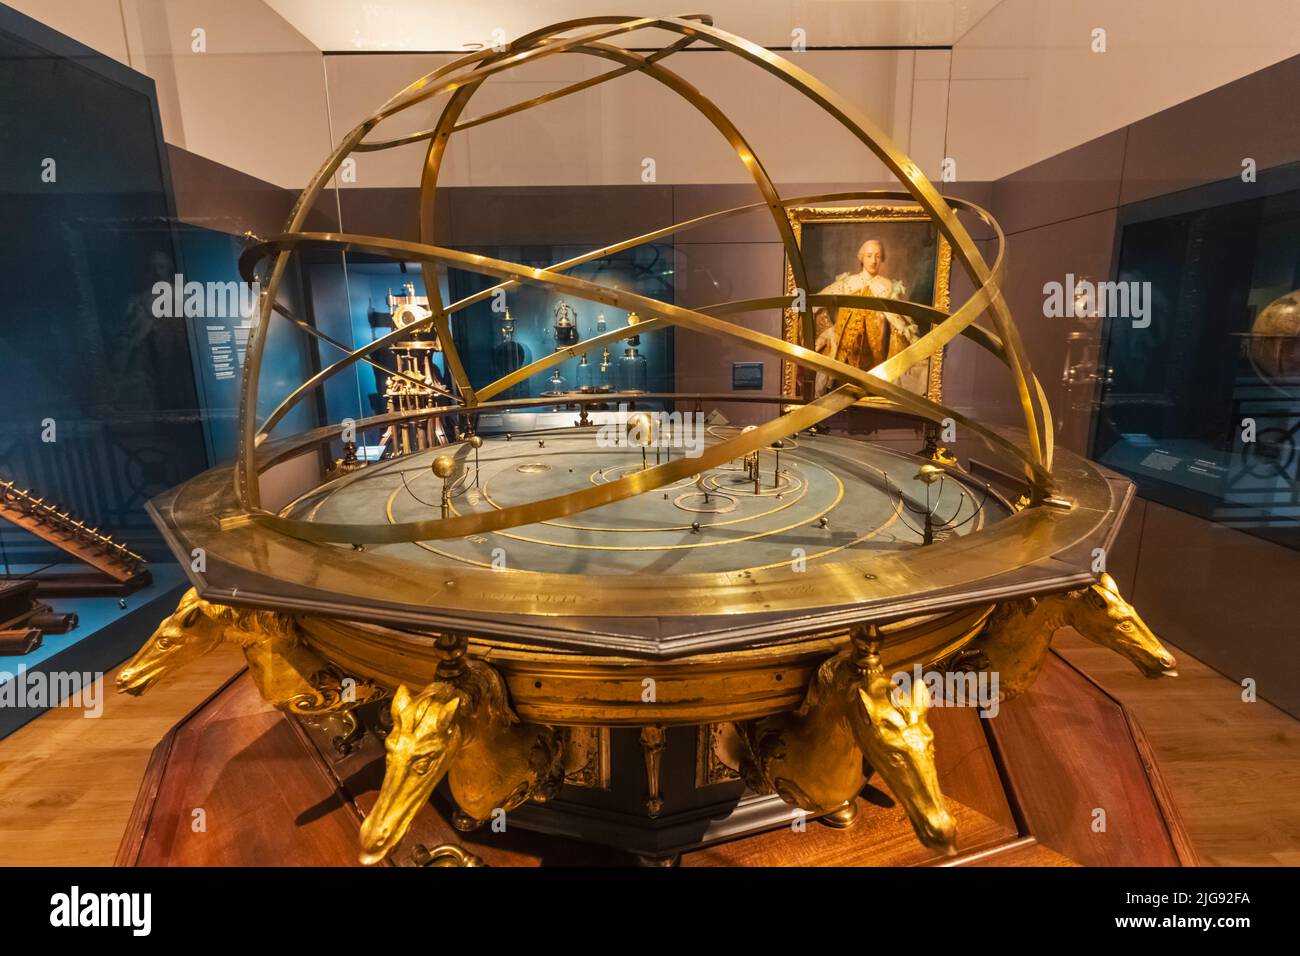 England, London, South Kensington, Science Museum, Exhibit of The Grand Orrery showing The Movement of Planets dated 1733 Stock Photo